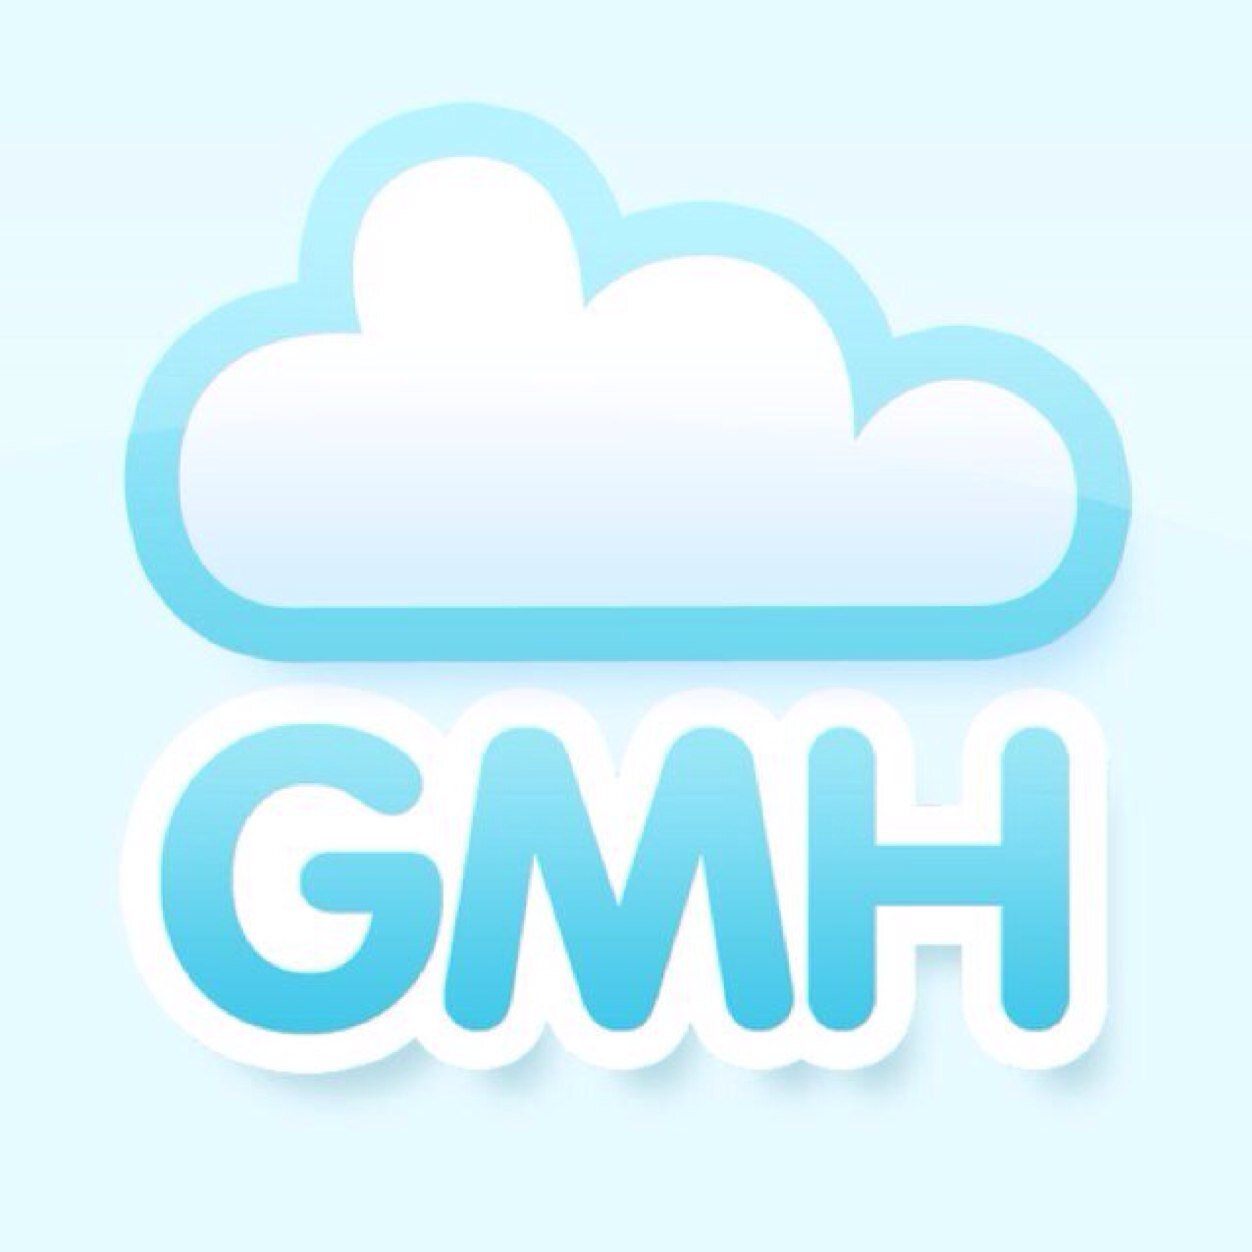 The best GMH (Gives Me Hope) posts from around the world, all worth a read. | *not affiliated with http://t.co/cf2h8L4lvc* |